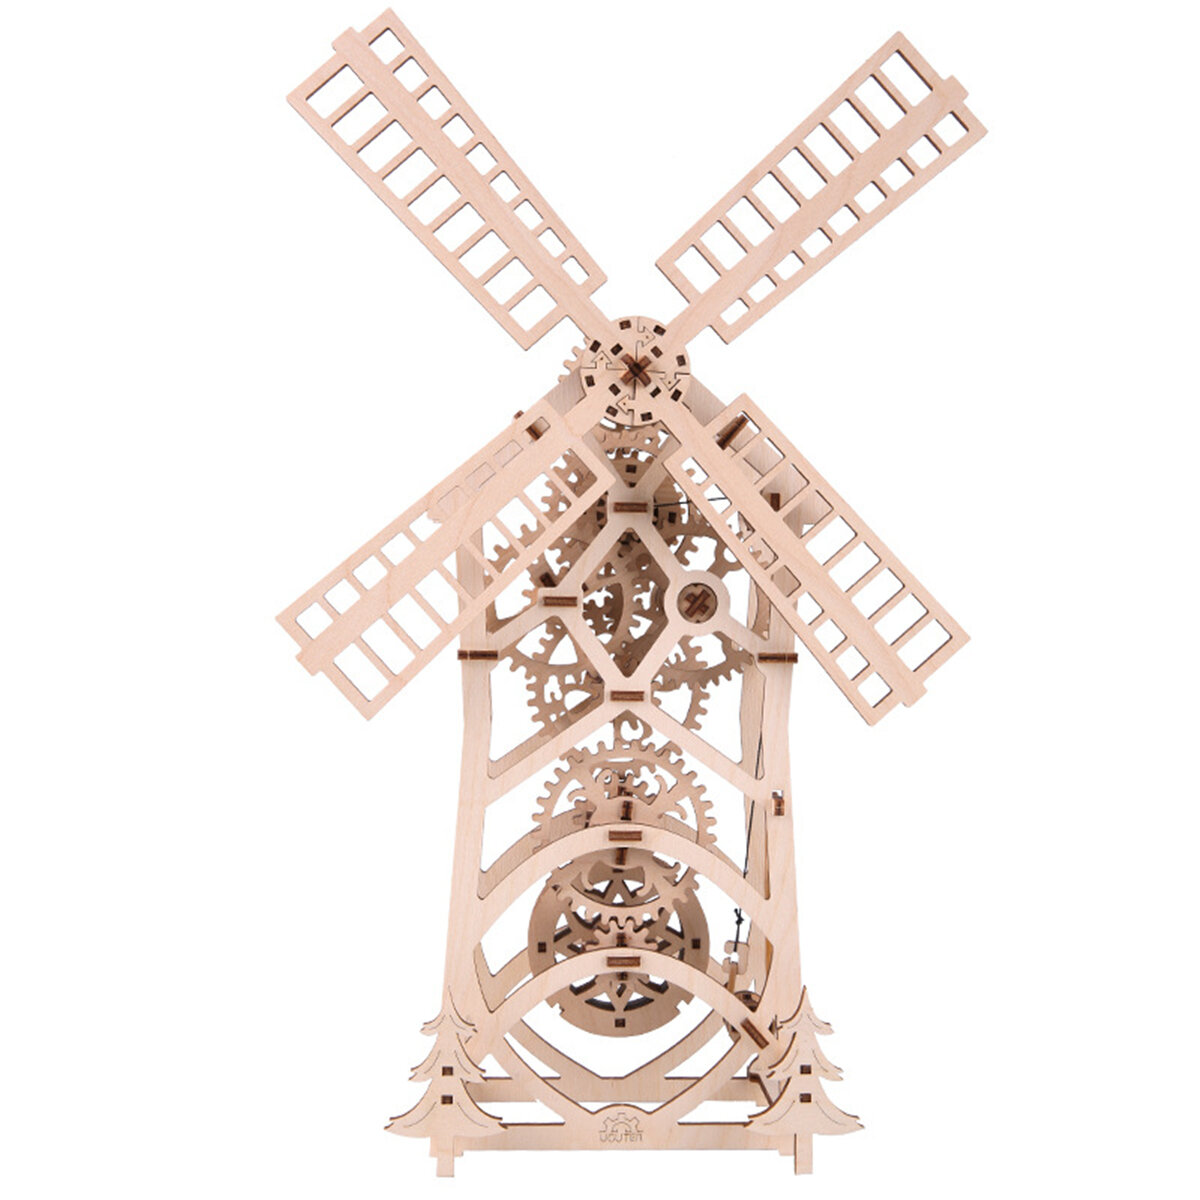 

3D Wooden Windmill Puzzle DIY Mechanical Transmission Model Assembly Toys Creative Gift